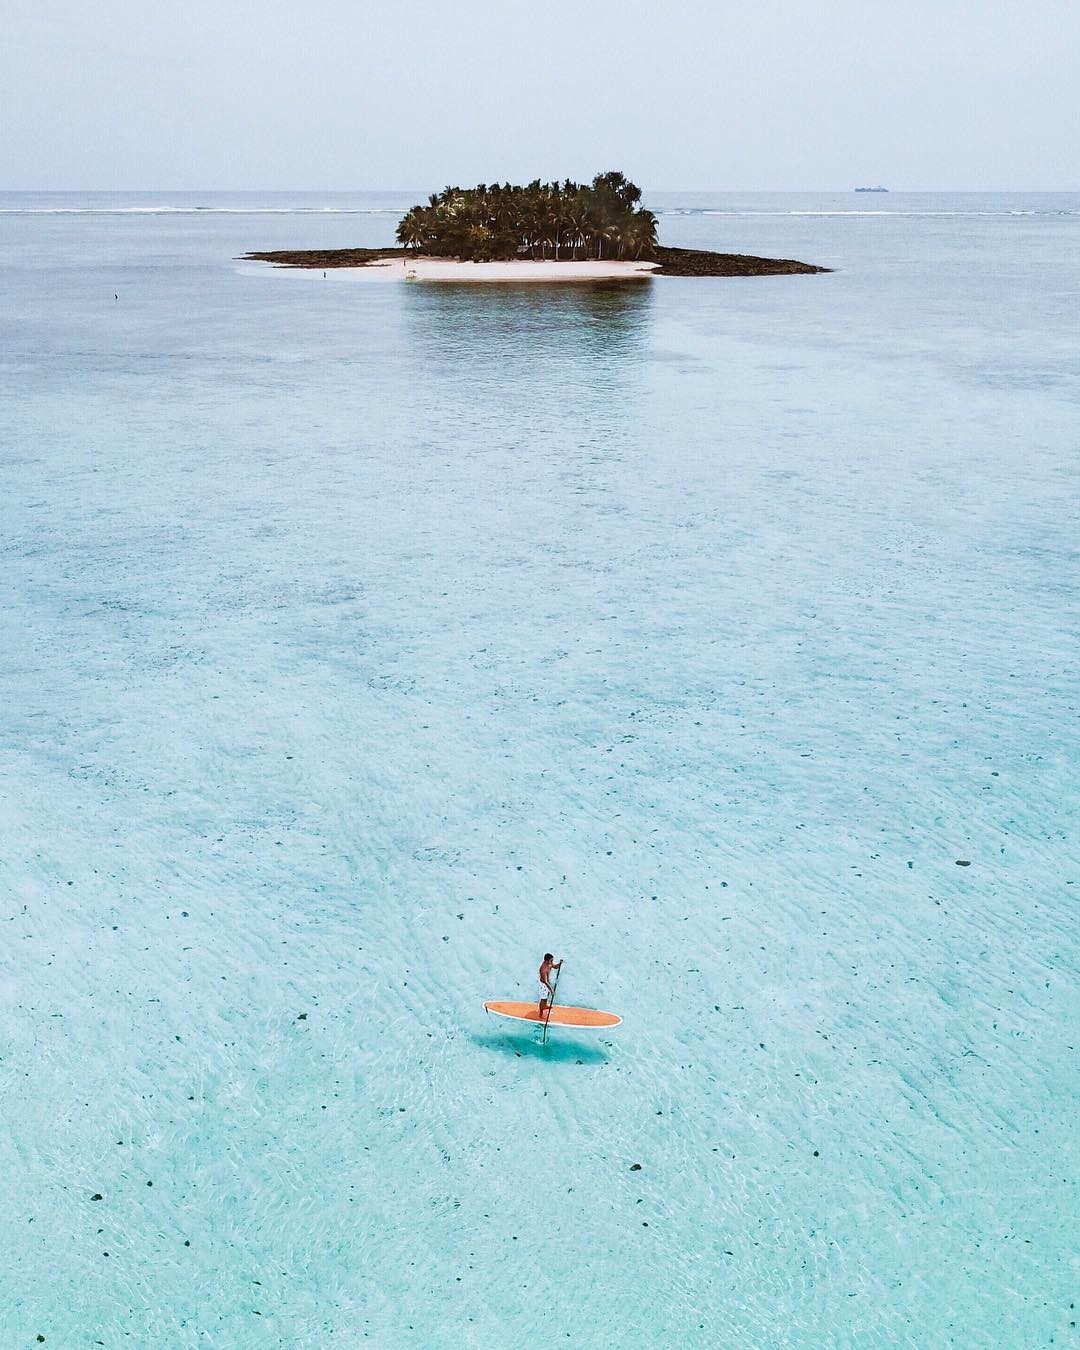 While in Siargao, the Philippines, take the opportunity to charter one of Nay Palad’s two private yachts and sail around the white-sand-ringed islet of Guyam.